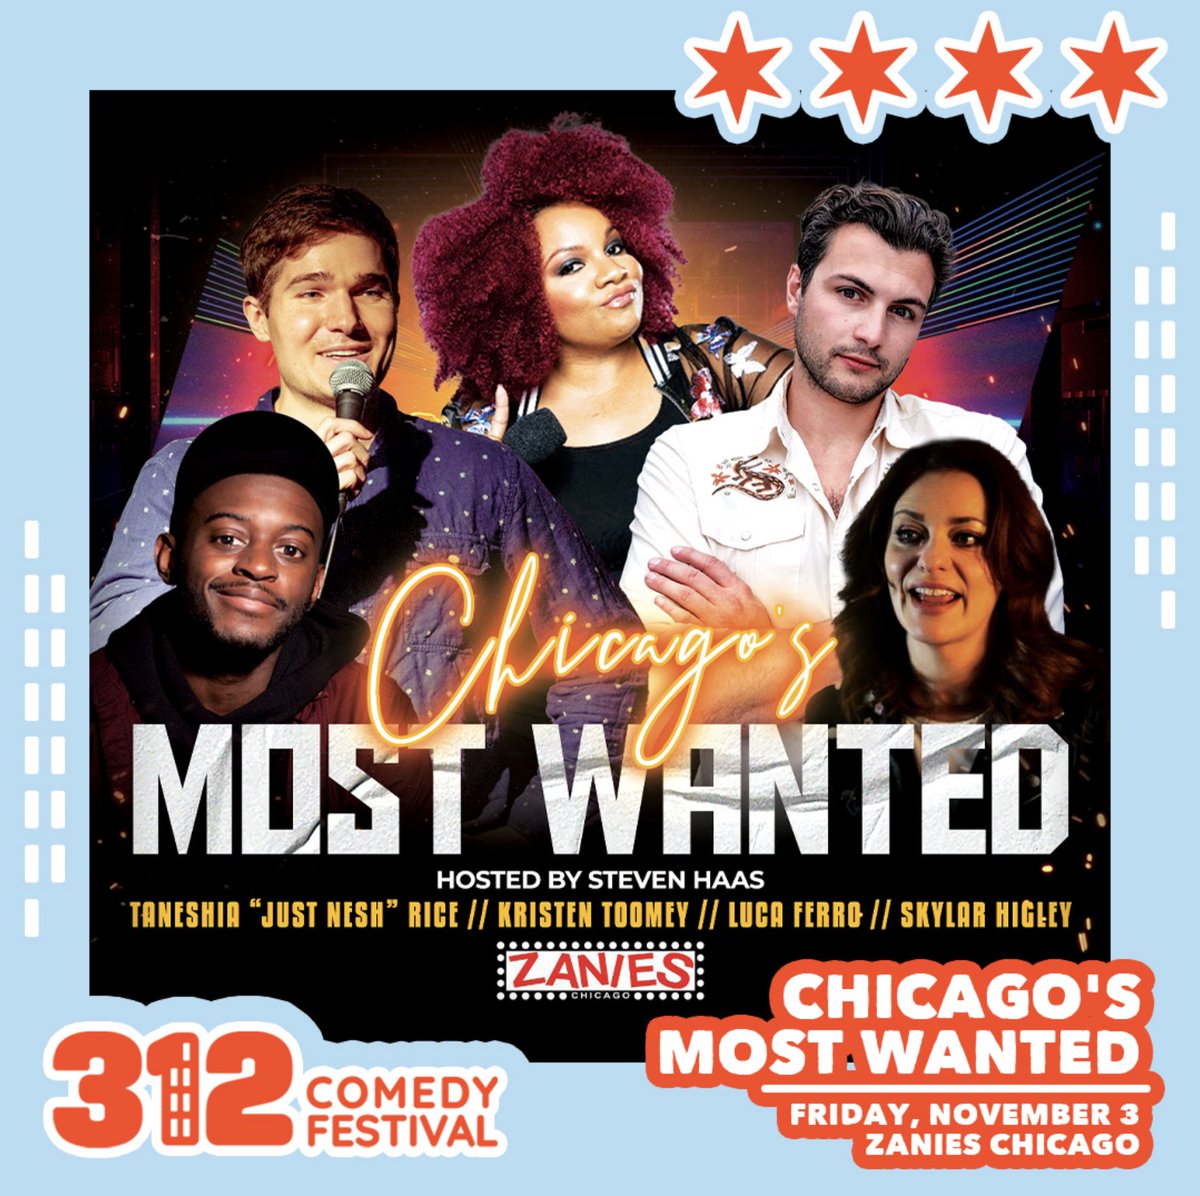 🎙️ 312 COMEDY FESTIVAL SHOW Join us November 3 for Chicago's Most Wanted! Chicago's hottest headliners will share the Zanies stage for one night only as part of the @312ComedyFest. Grab tickets while you can, Chicago--> bit.ly/312Fest_CMW110…